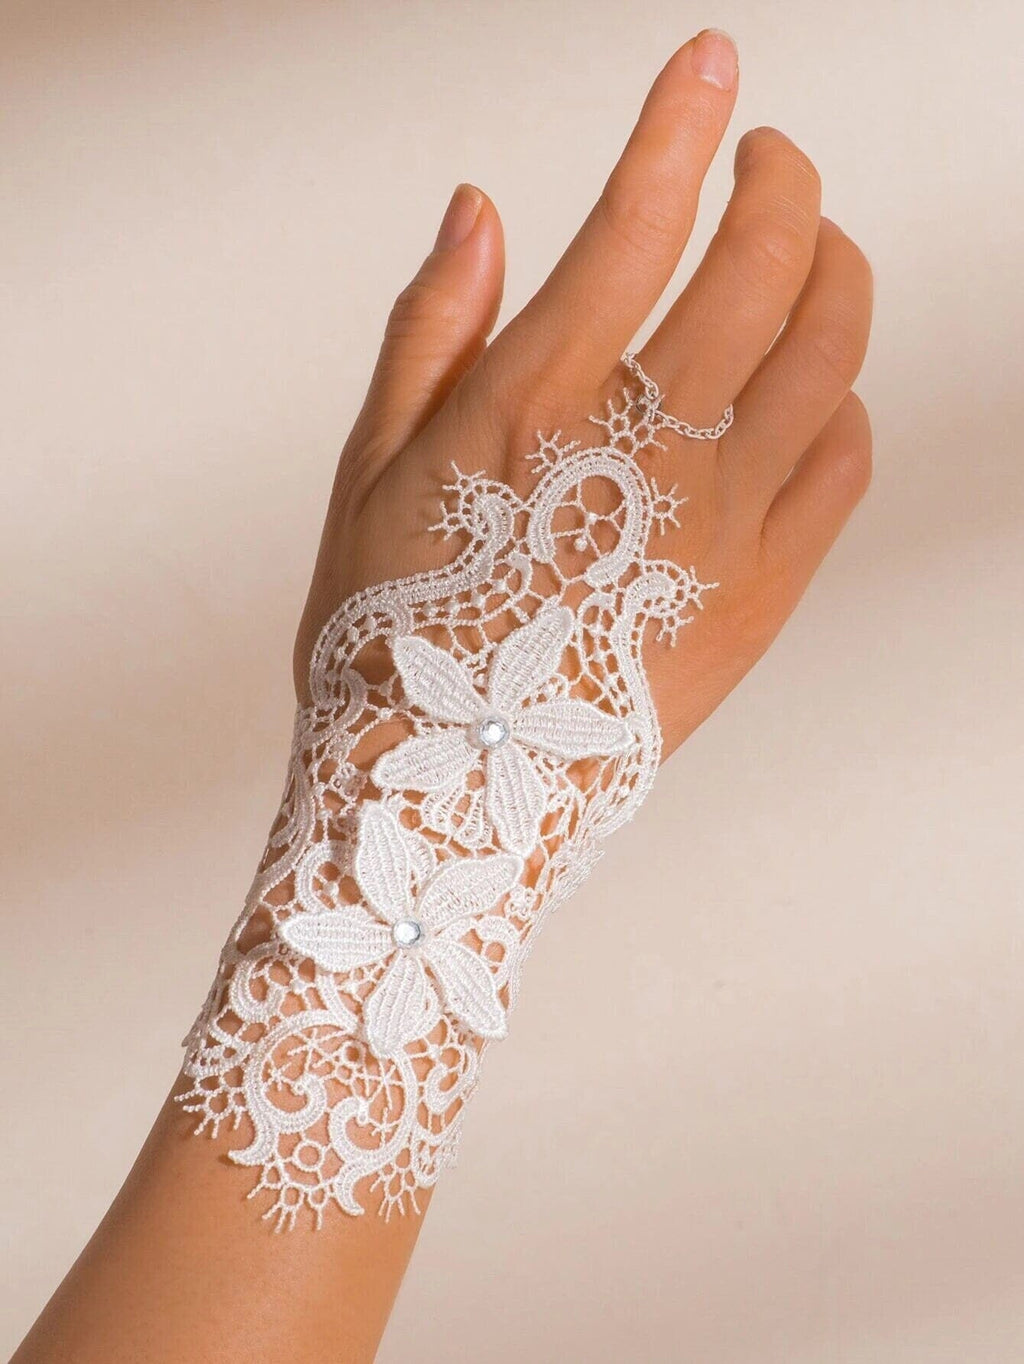 White Tatted Lace Bridal Gloves, Wedding Rhinestone Crystal Embroidered Knitted Gloves, First Communion Girl Gloves, 1 Pair - KaleaBoutique.com